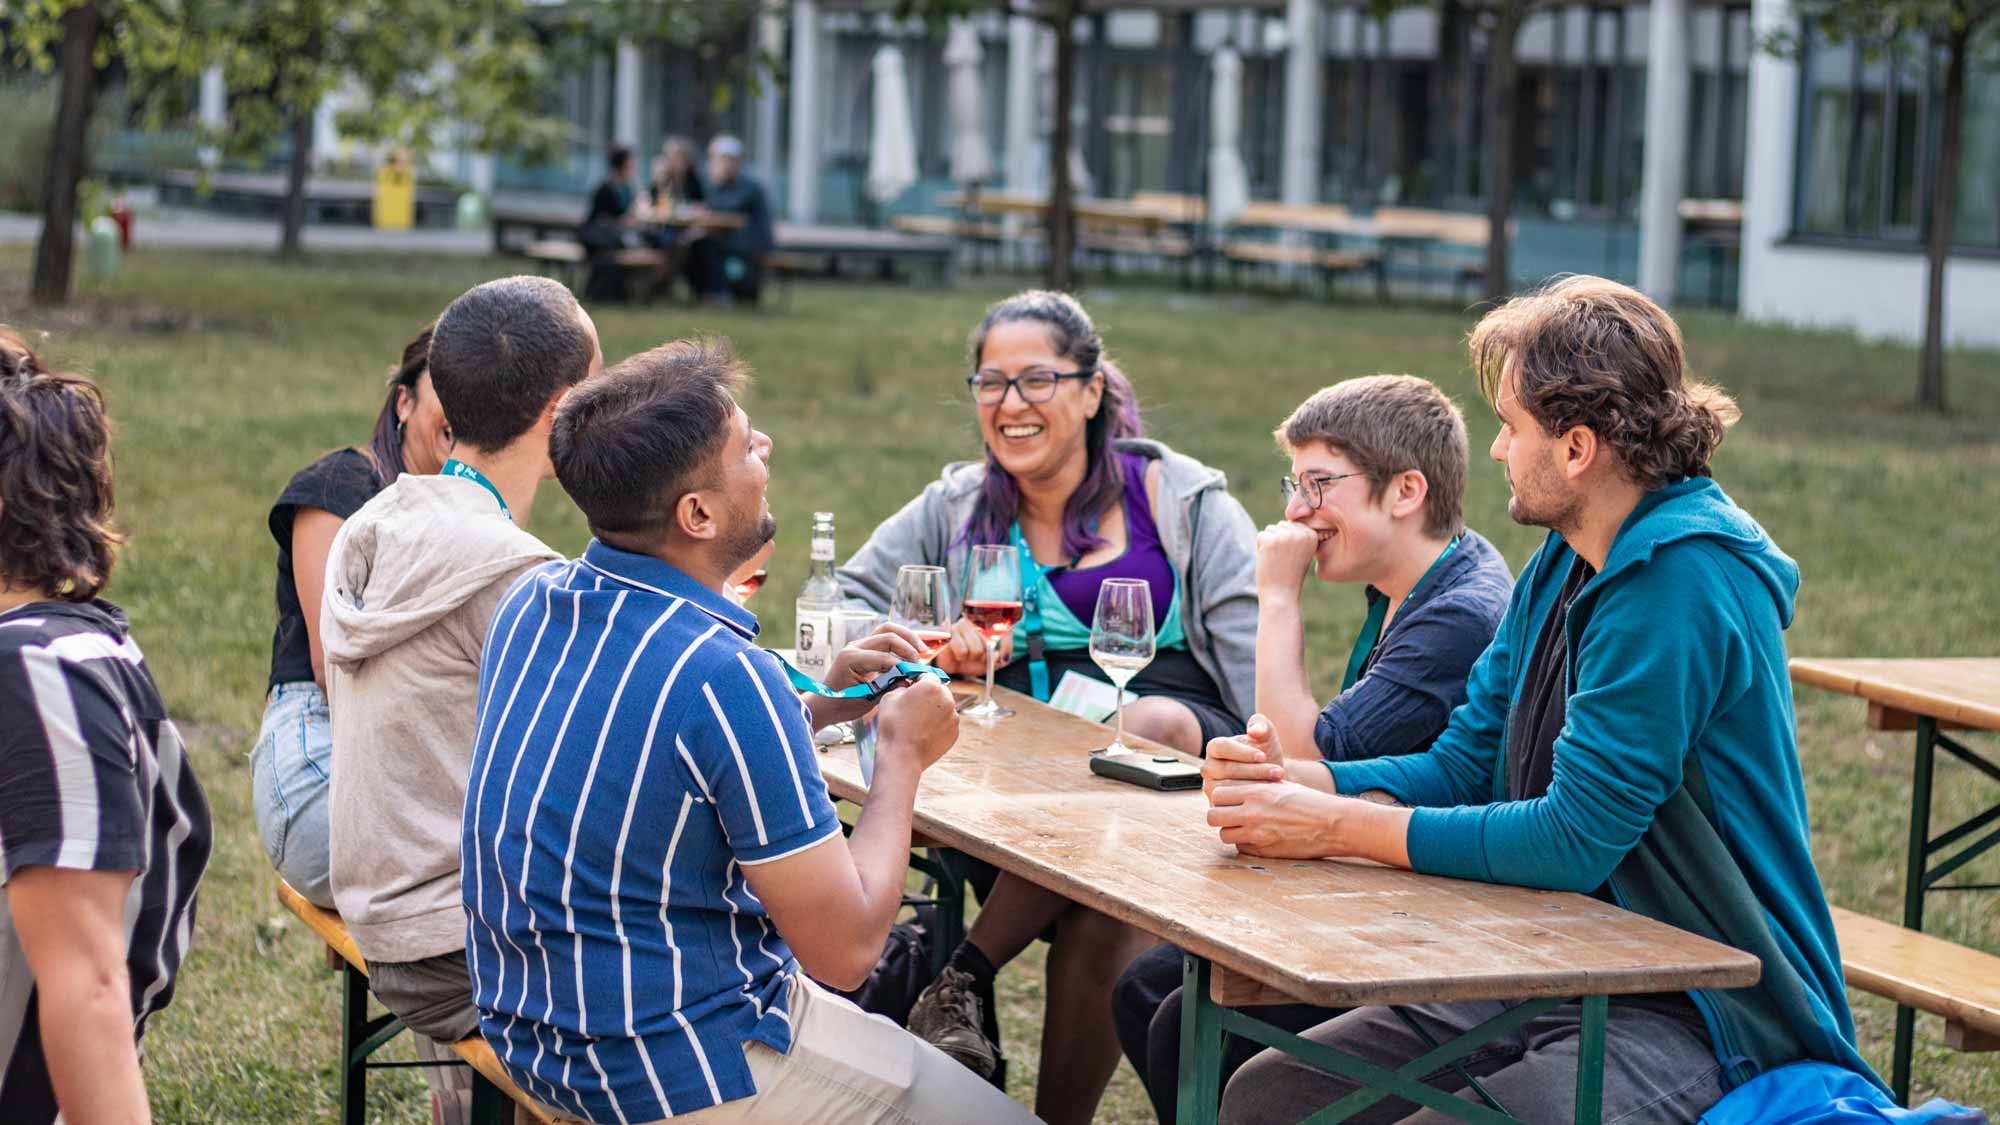 Students sitting on a table outside, chatting and having a drink